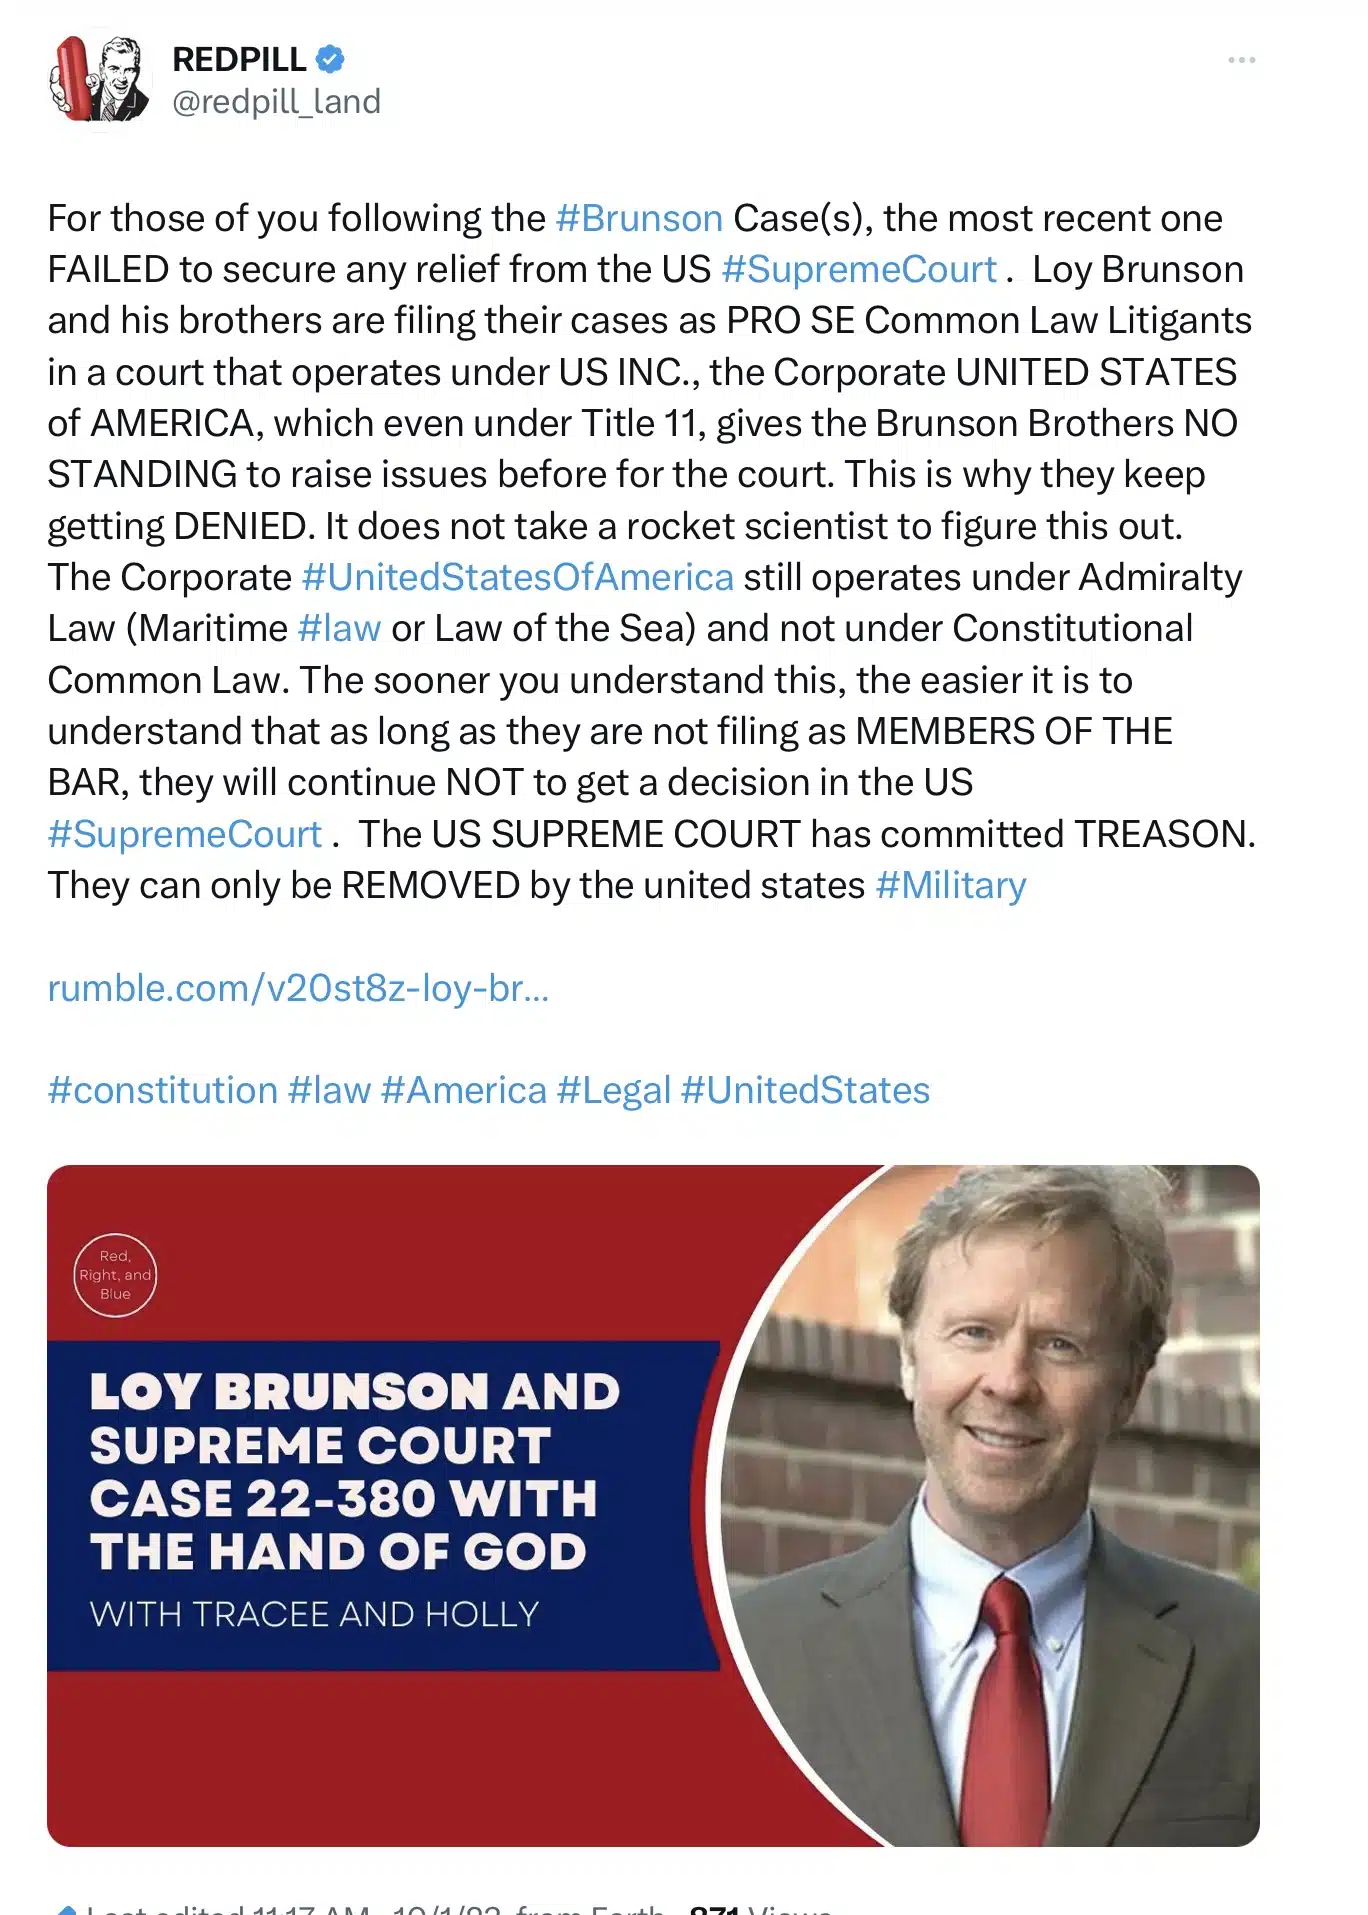 A sovereign citizen explains why the brunsons lost